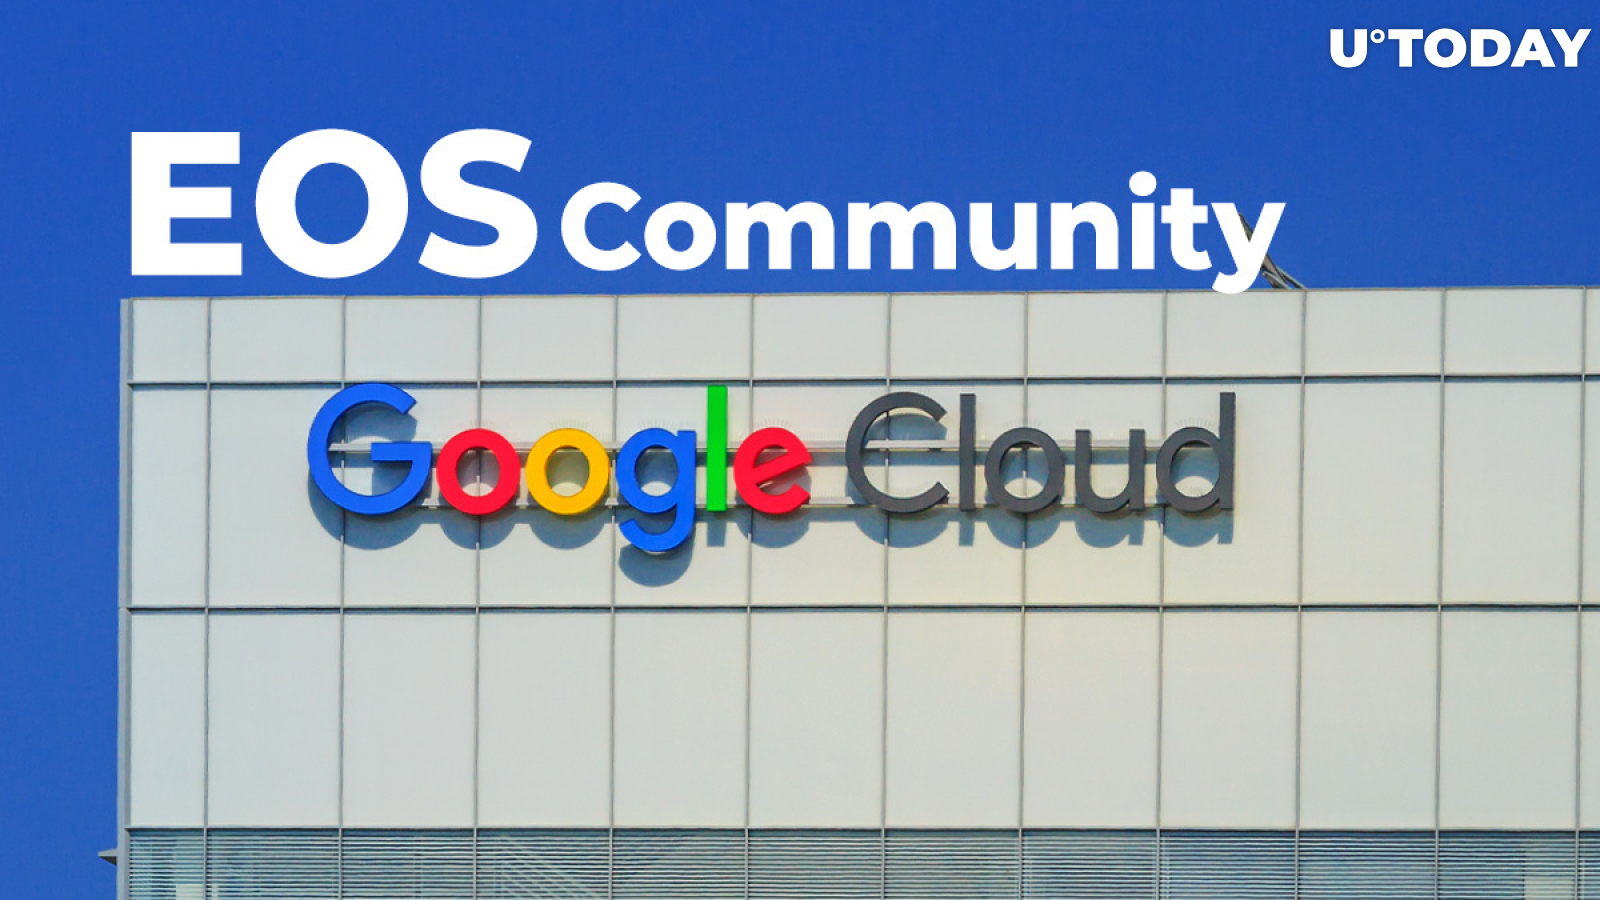 Google Cloud Joins EOS Community to Become Block Producer: Block.one